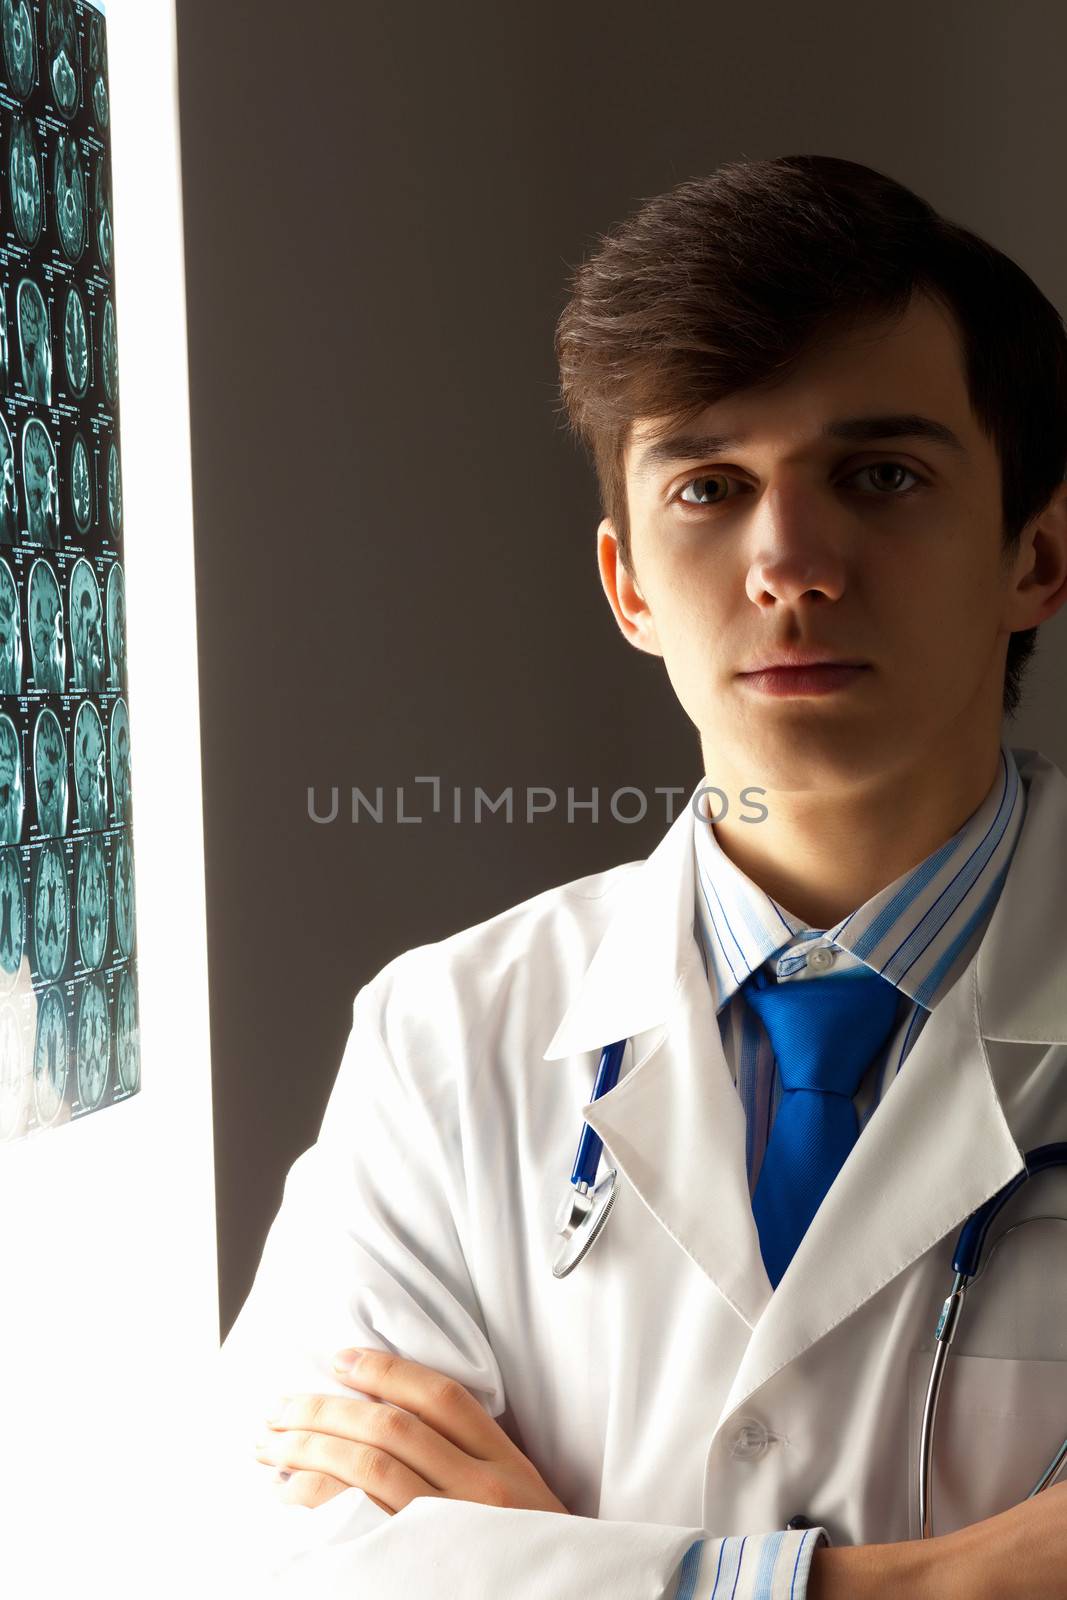 Male radiologist by sergey_nivens